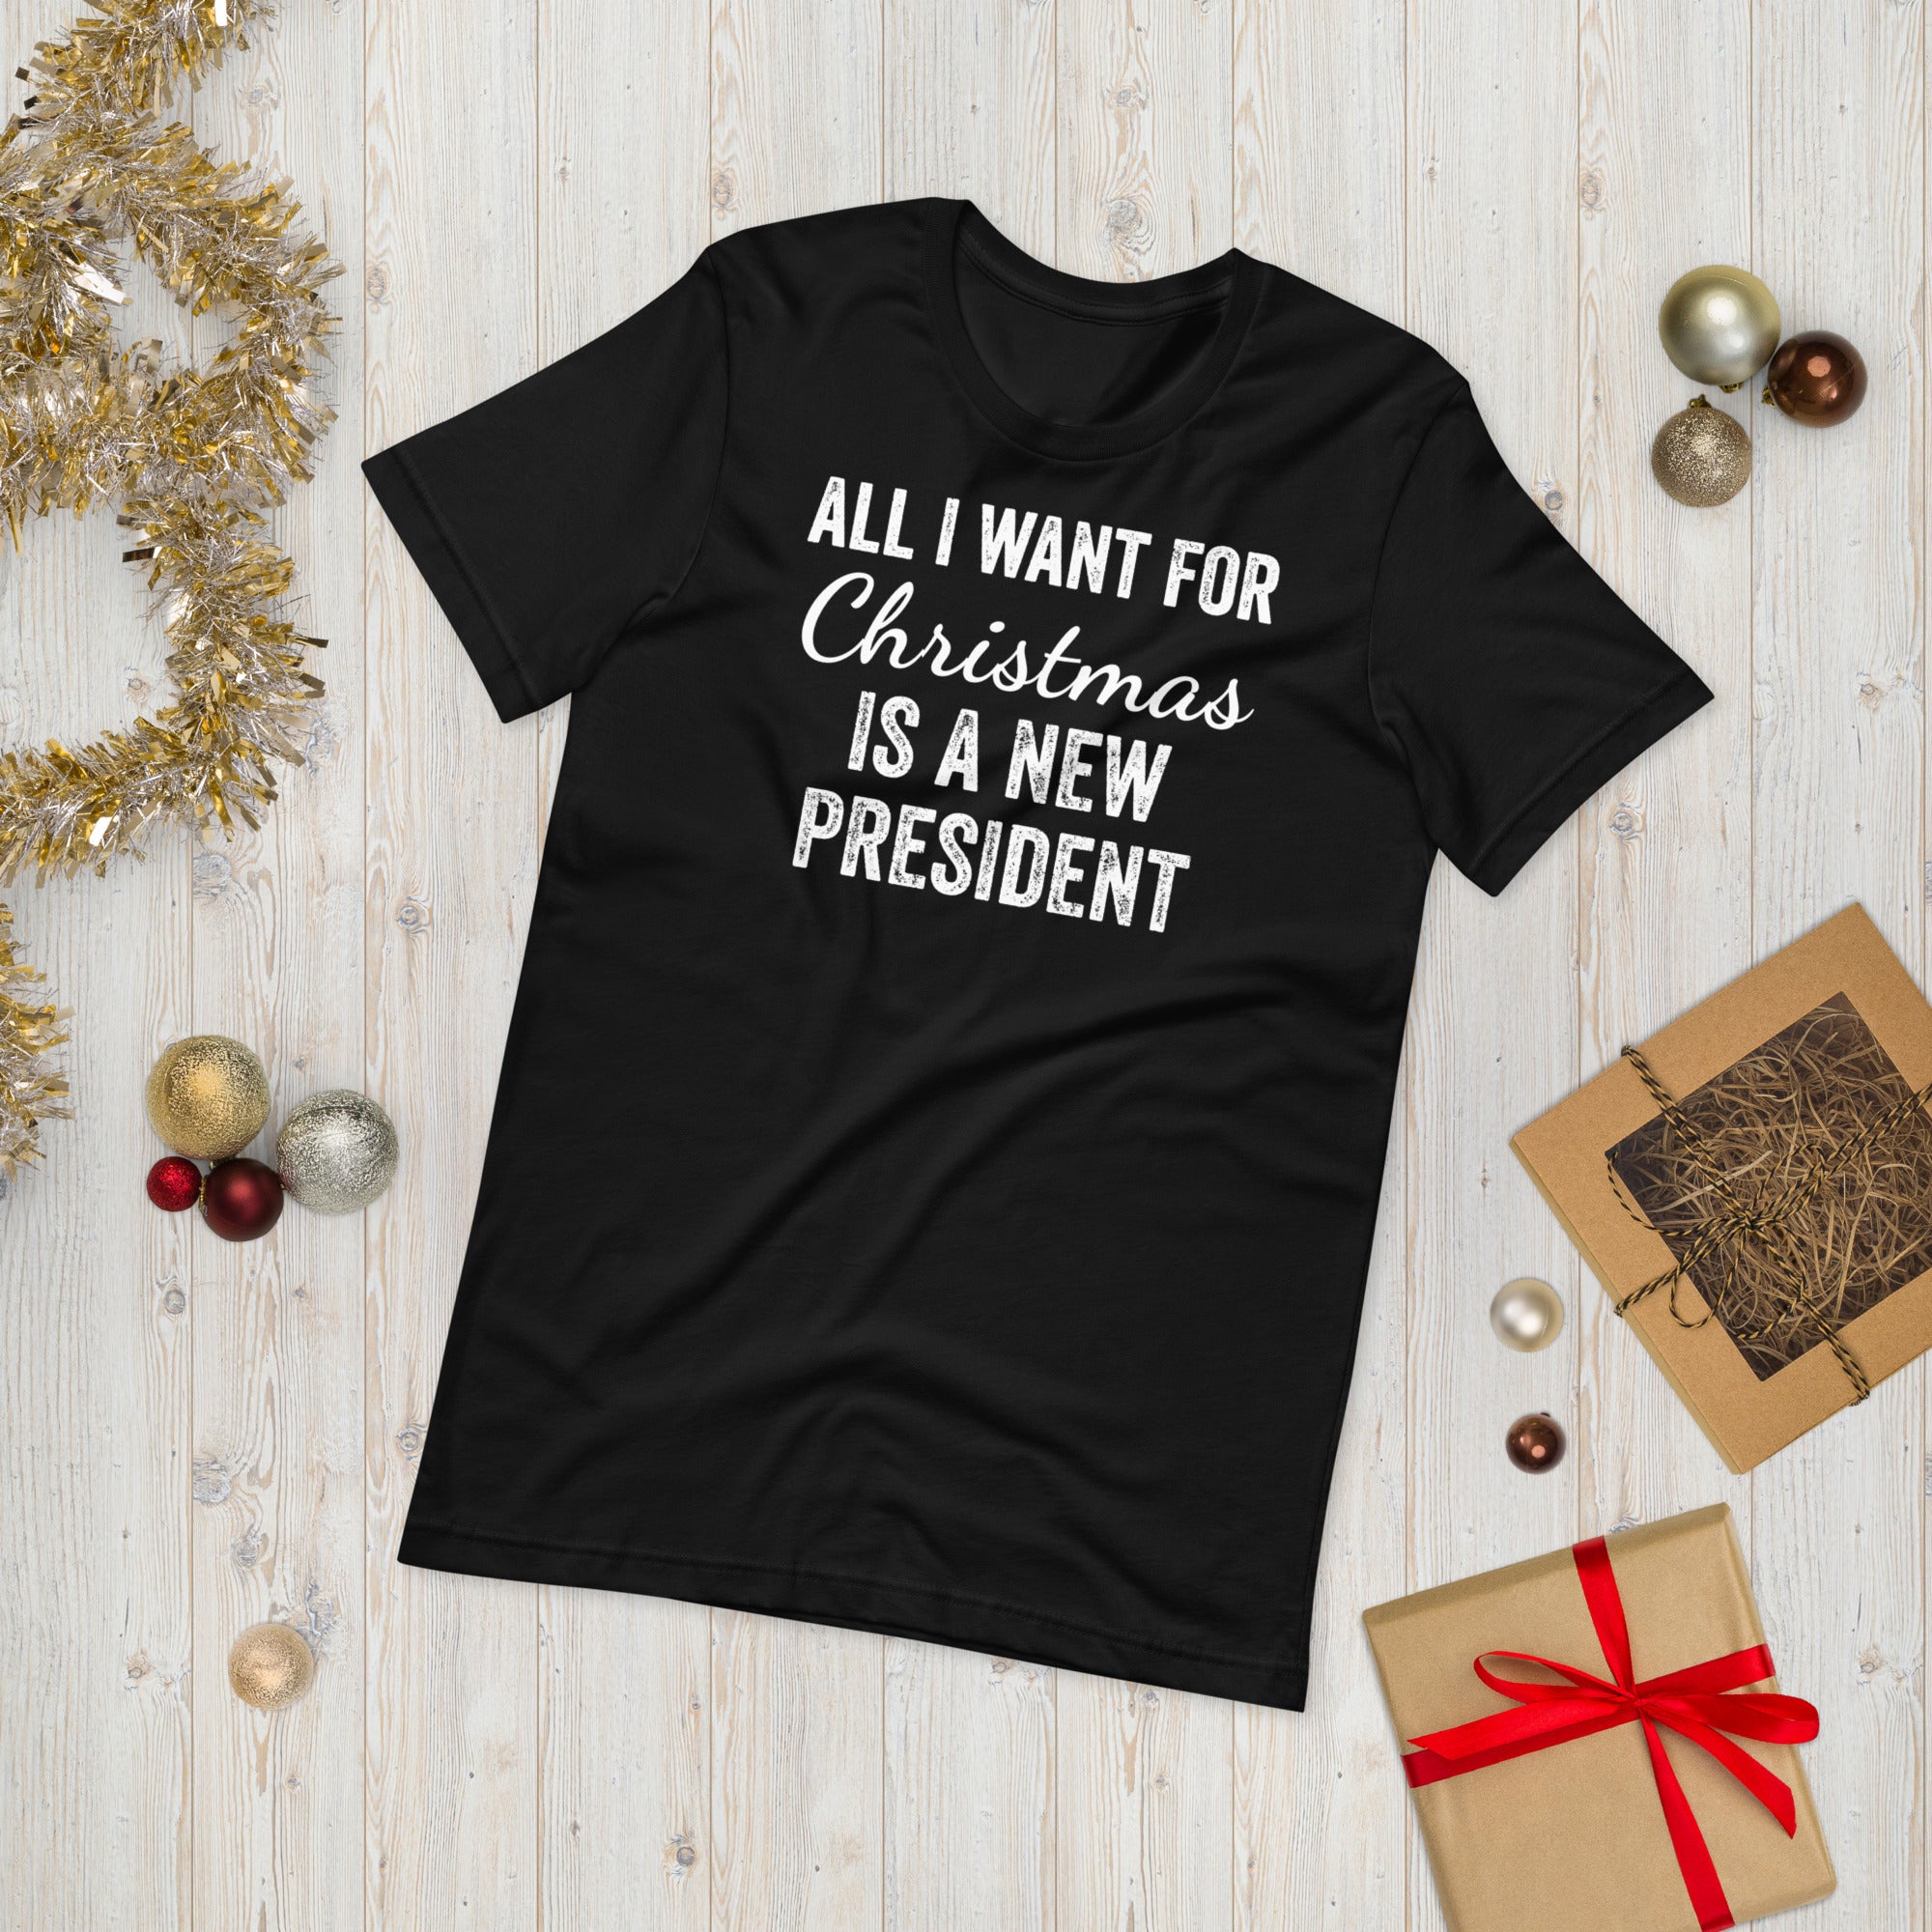 All I Want For Christmas Is A New President T Shirt, FJB Christmas Shirt, Christmas Gift, Anti Biden Gift, Christmas Pajamas, FJB Xmas Shirt - Madeinsea©